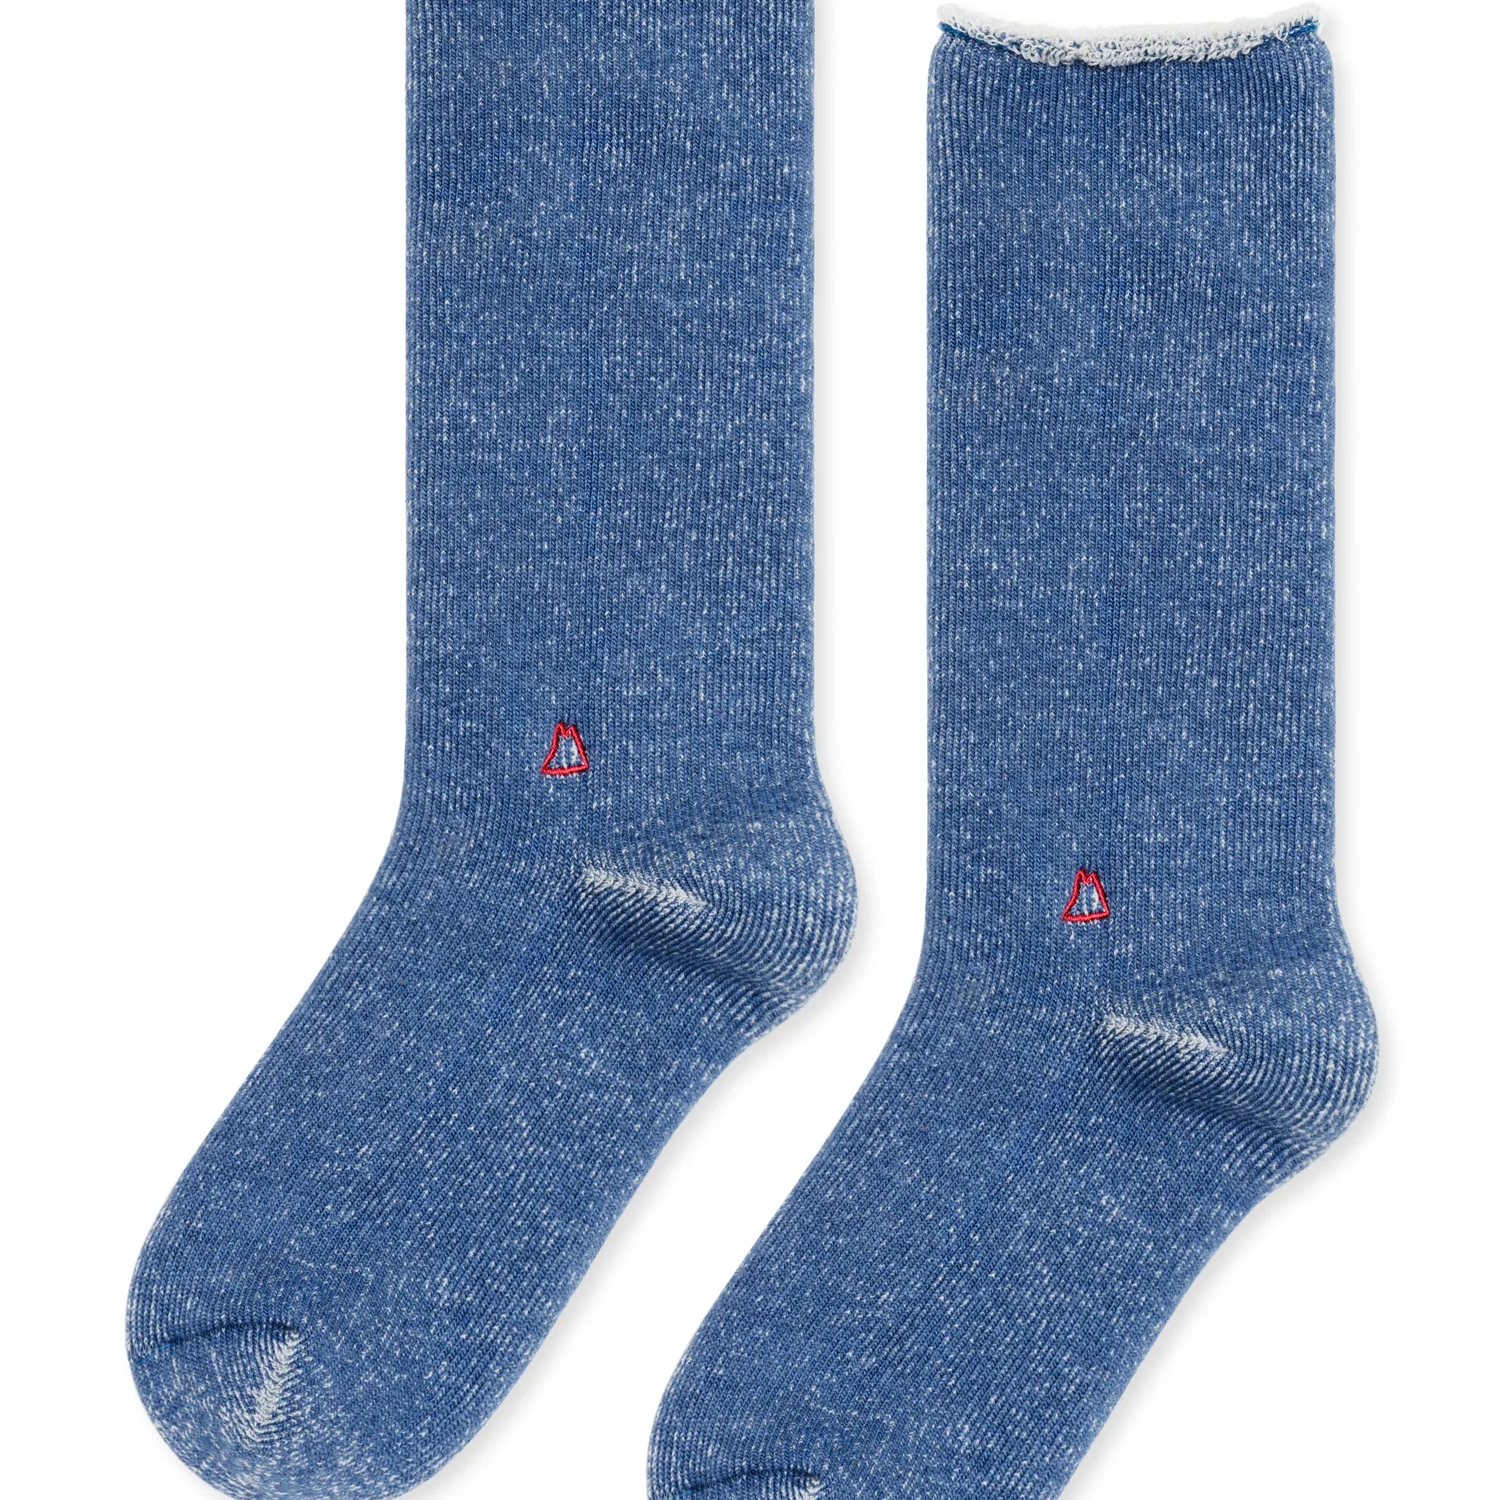 light blue pair of hoodie socks. Laid flat on top of a white background. 